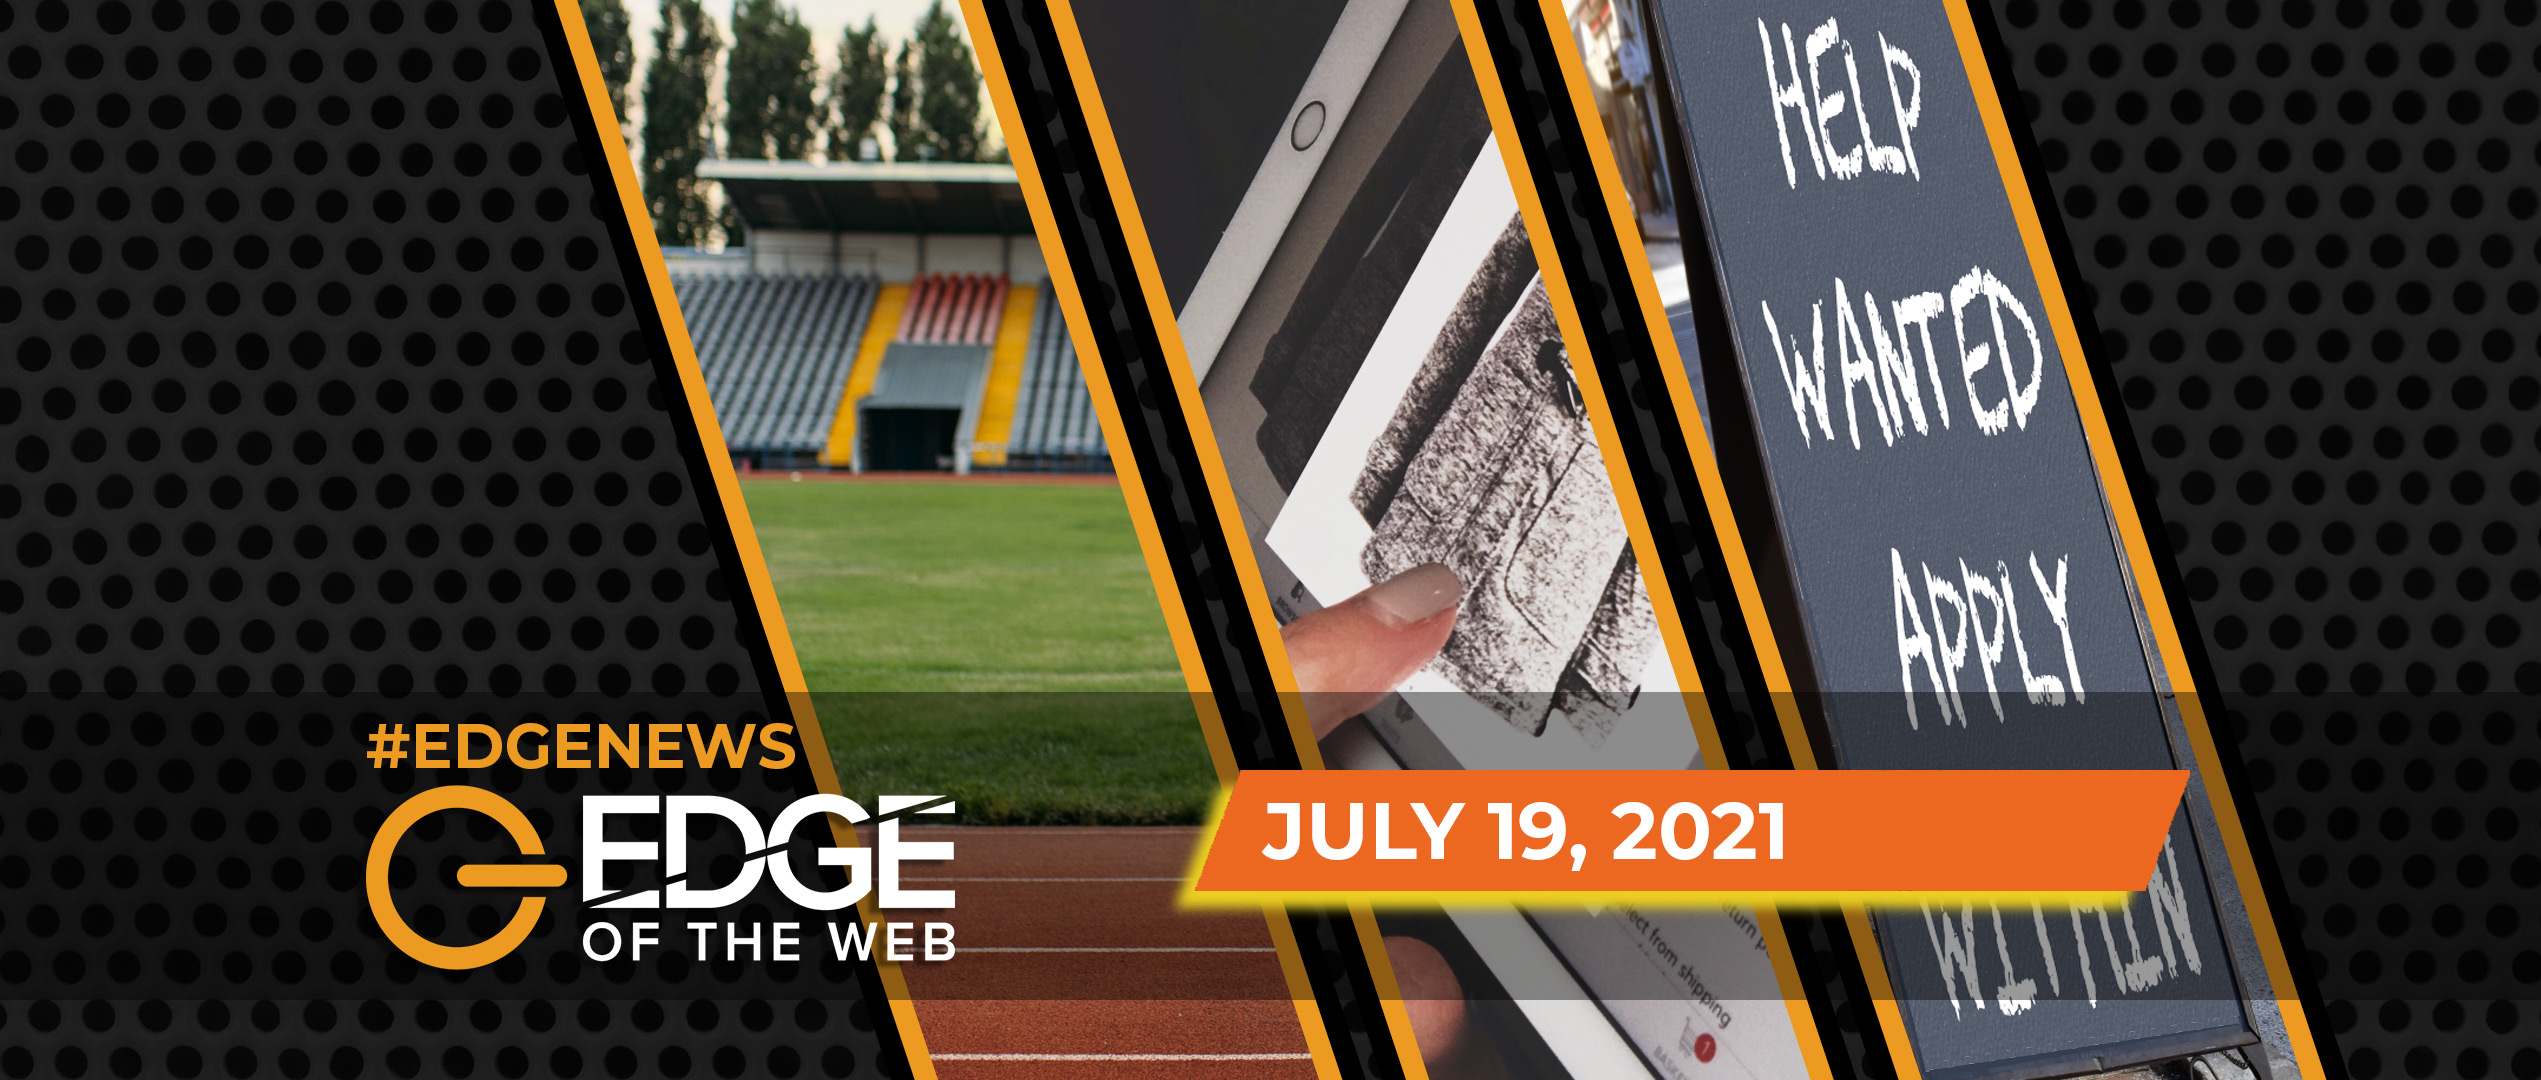 436 | News from the EDGE | Week of 7.19.2021